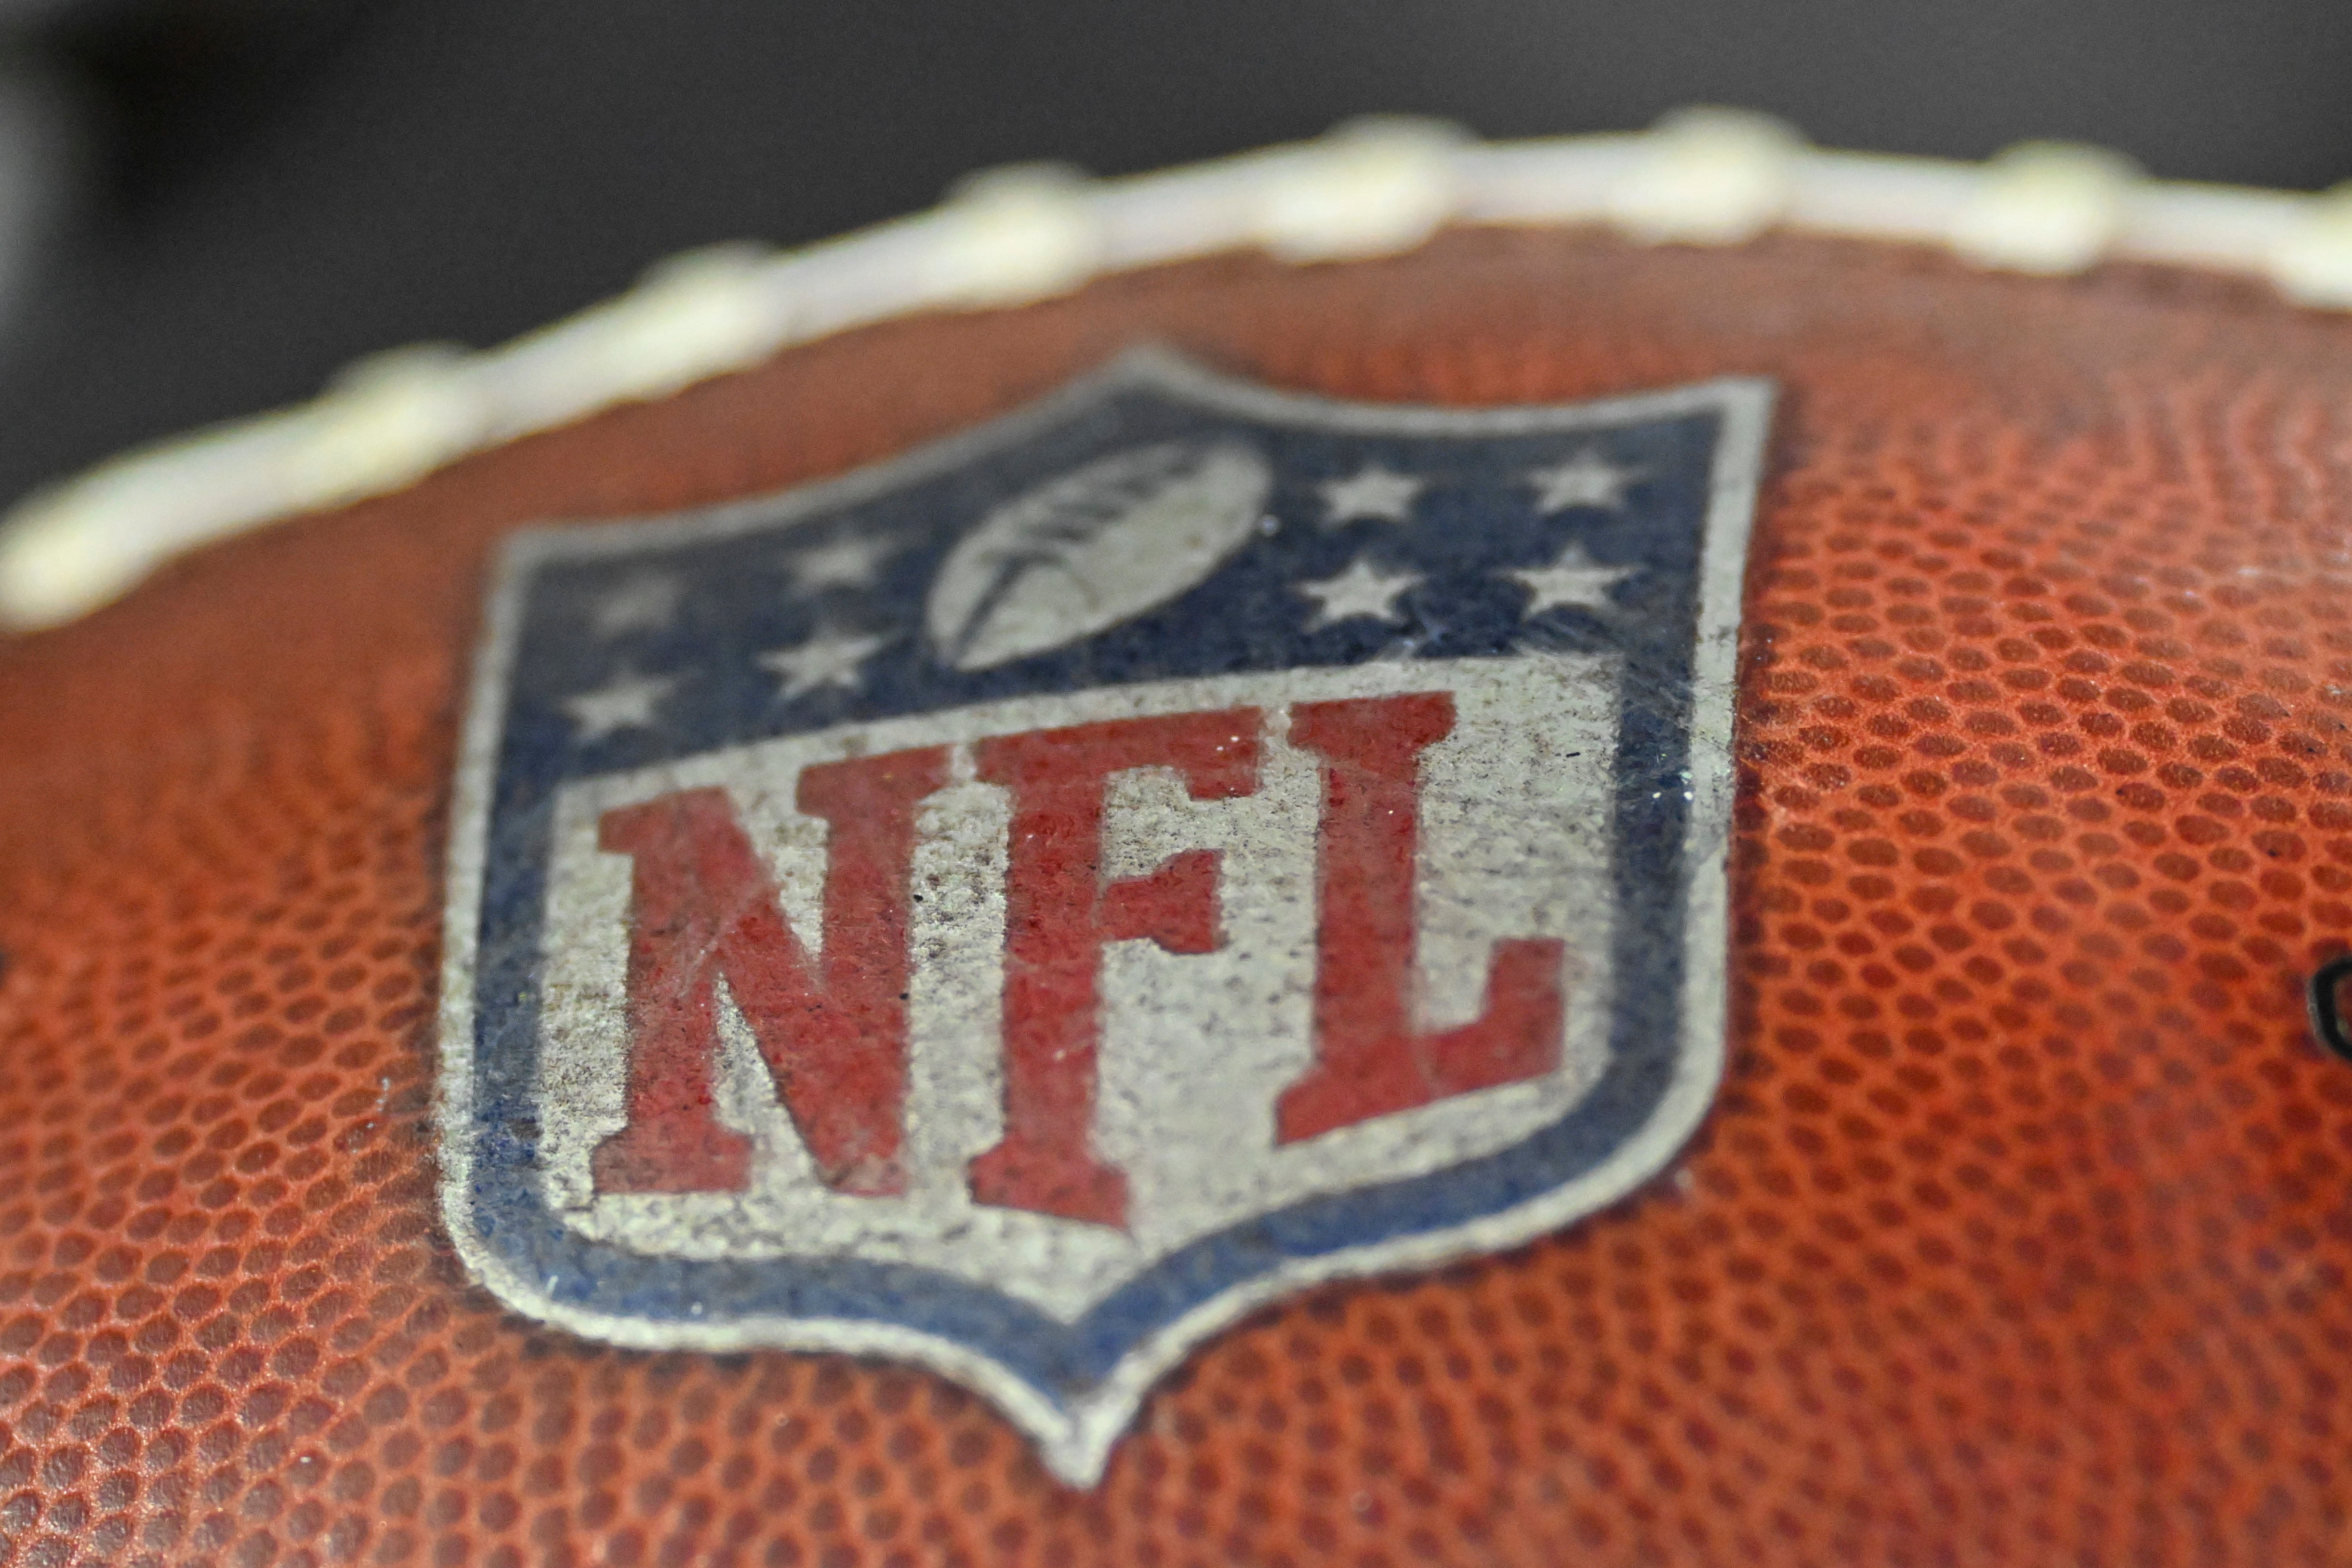 Who plays on 'Sunday Night Football' tonight? Time, TV channel, schedule  for NFL Week 18 game